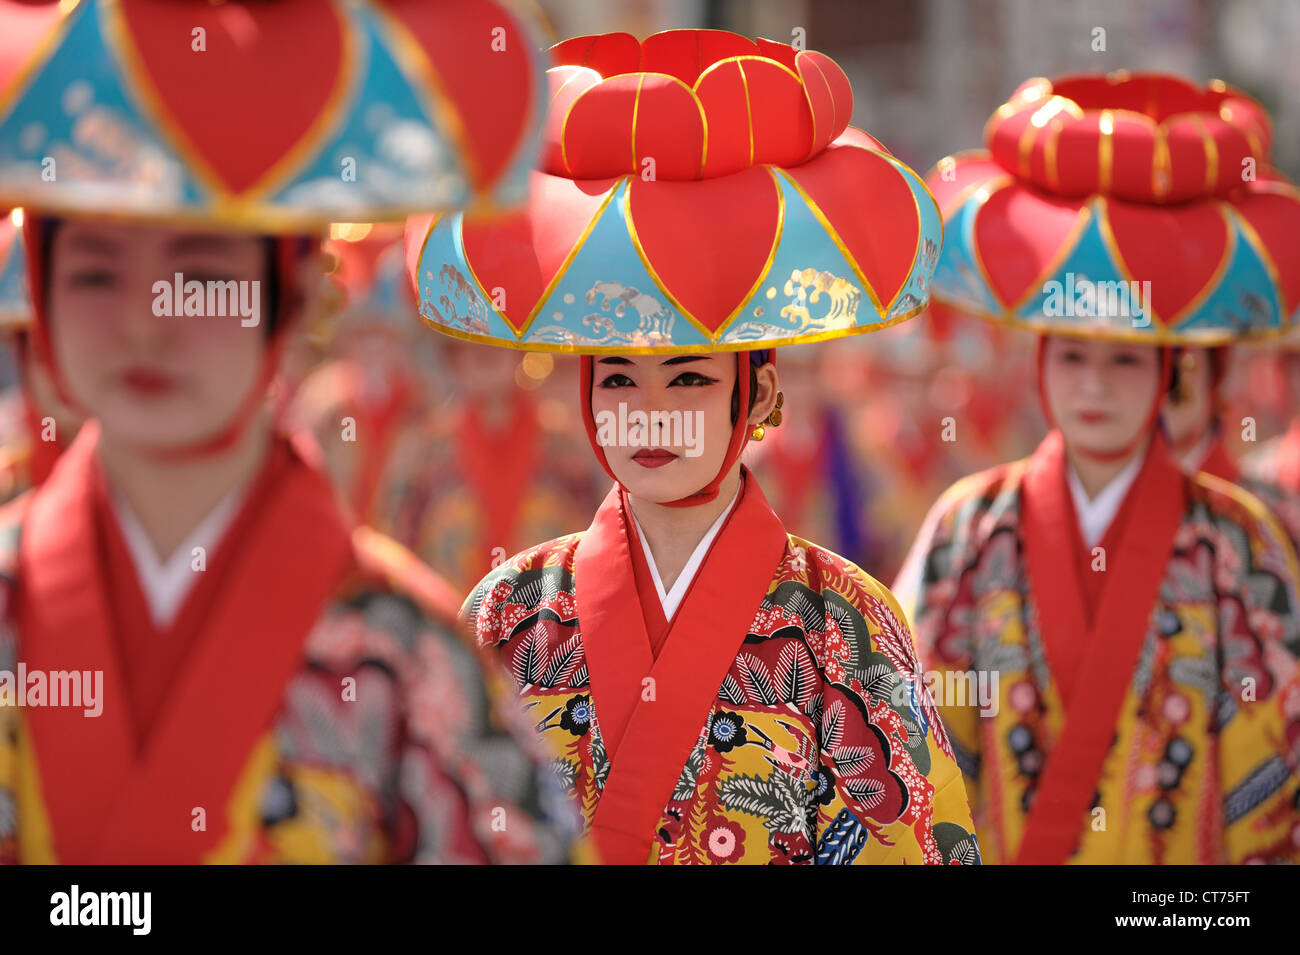 Dance performers make their way to the next location where they will perform during a local festival in Okinawa, Japan. Stock Photo